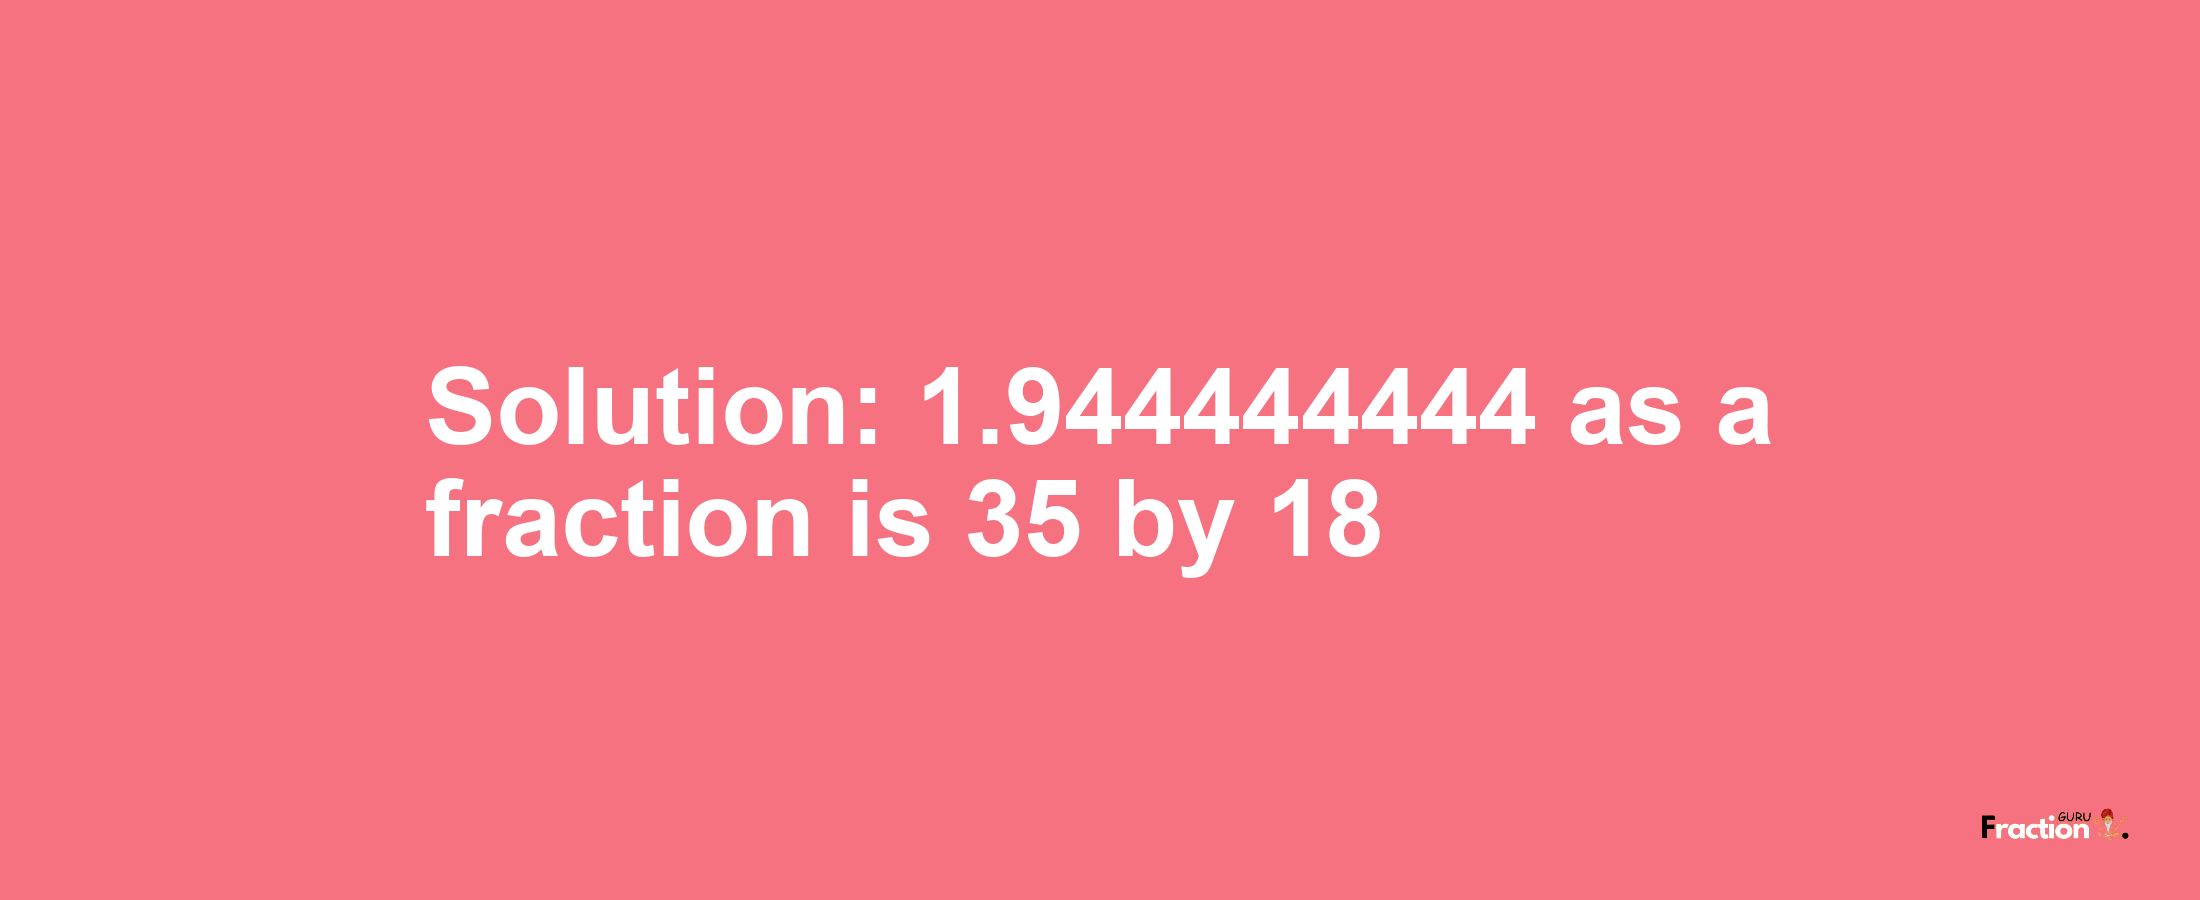 Solution:1.944444444 as a fraction is 35/18